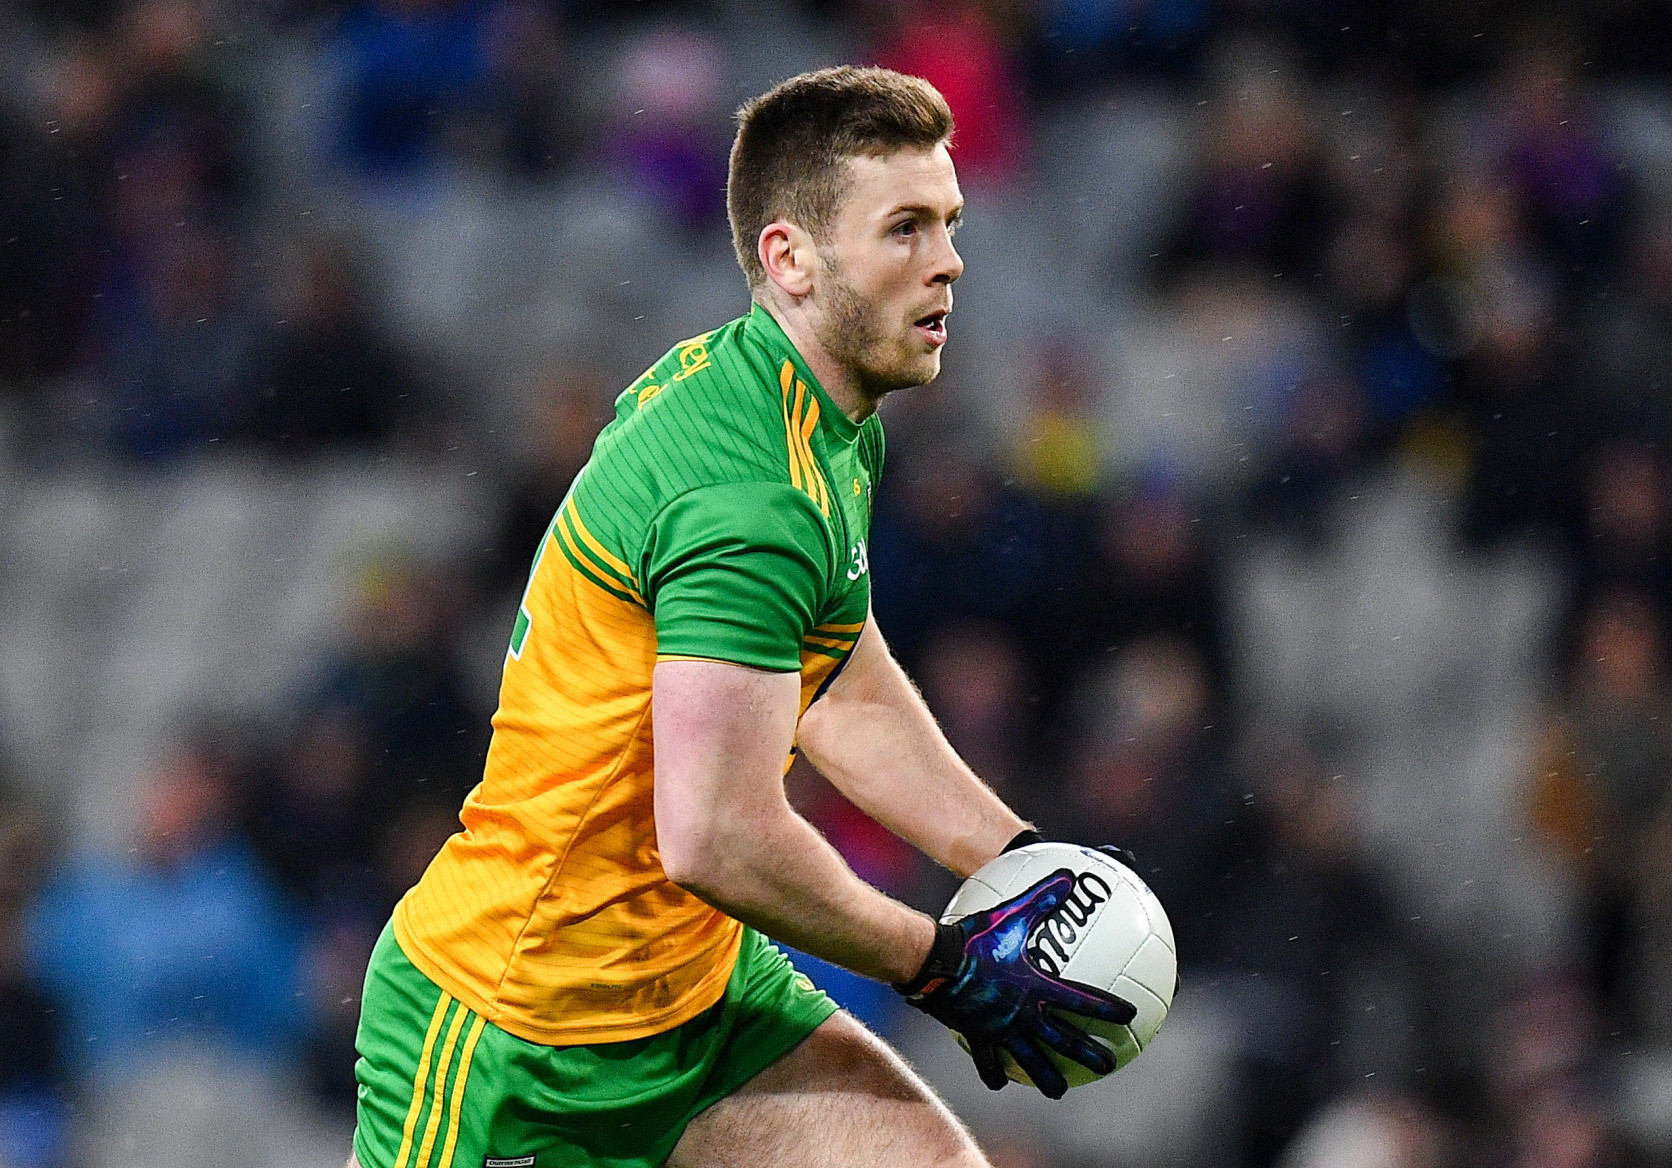 Eoghan Bán Gallagher: “Every player has in their head that it’s Championship time, and everyone has to be ready to go”